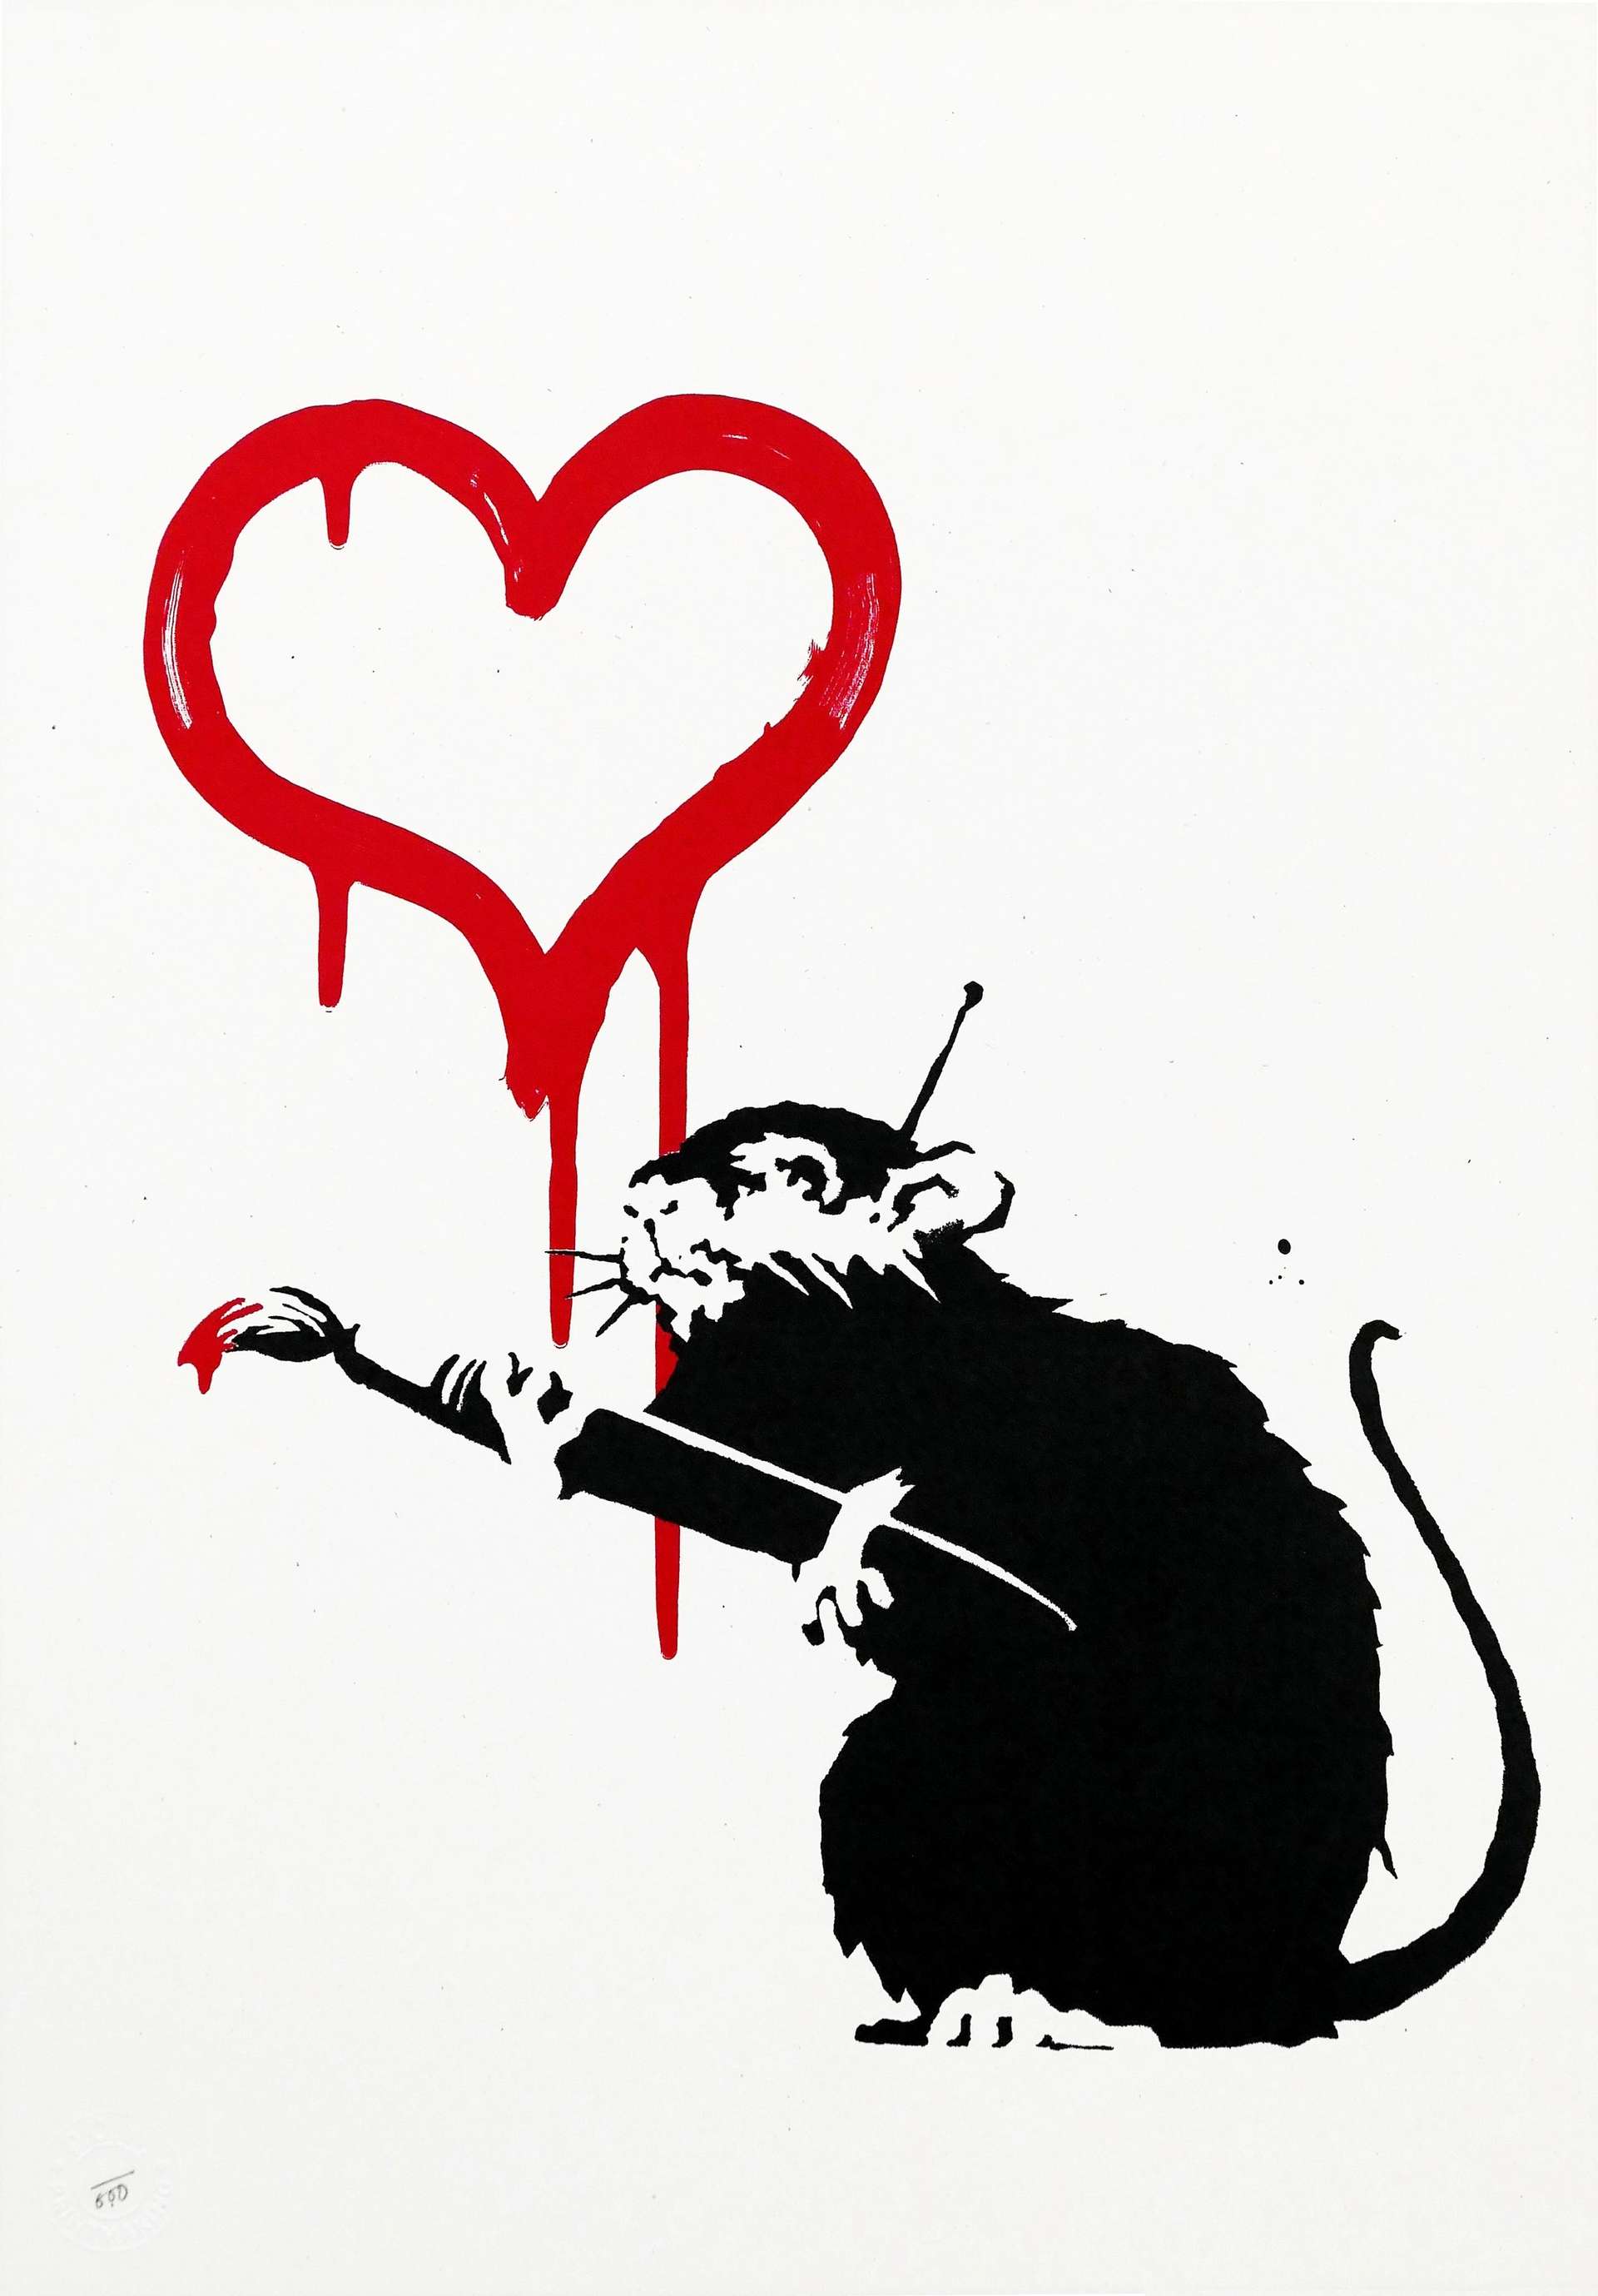 A screenprint by Banksy depicting a rat holding a paintbrush loaded with red paint, with a dripped red love-heart set against the white background.